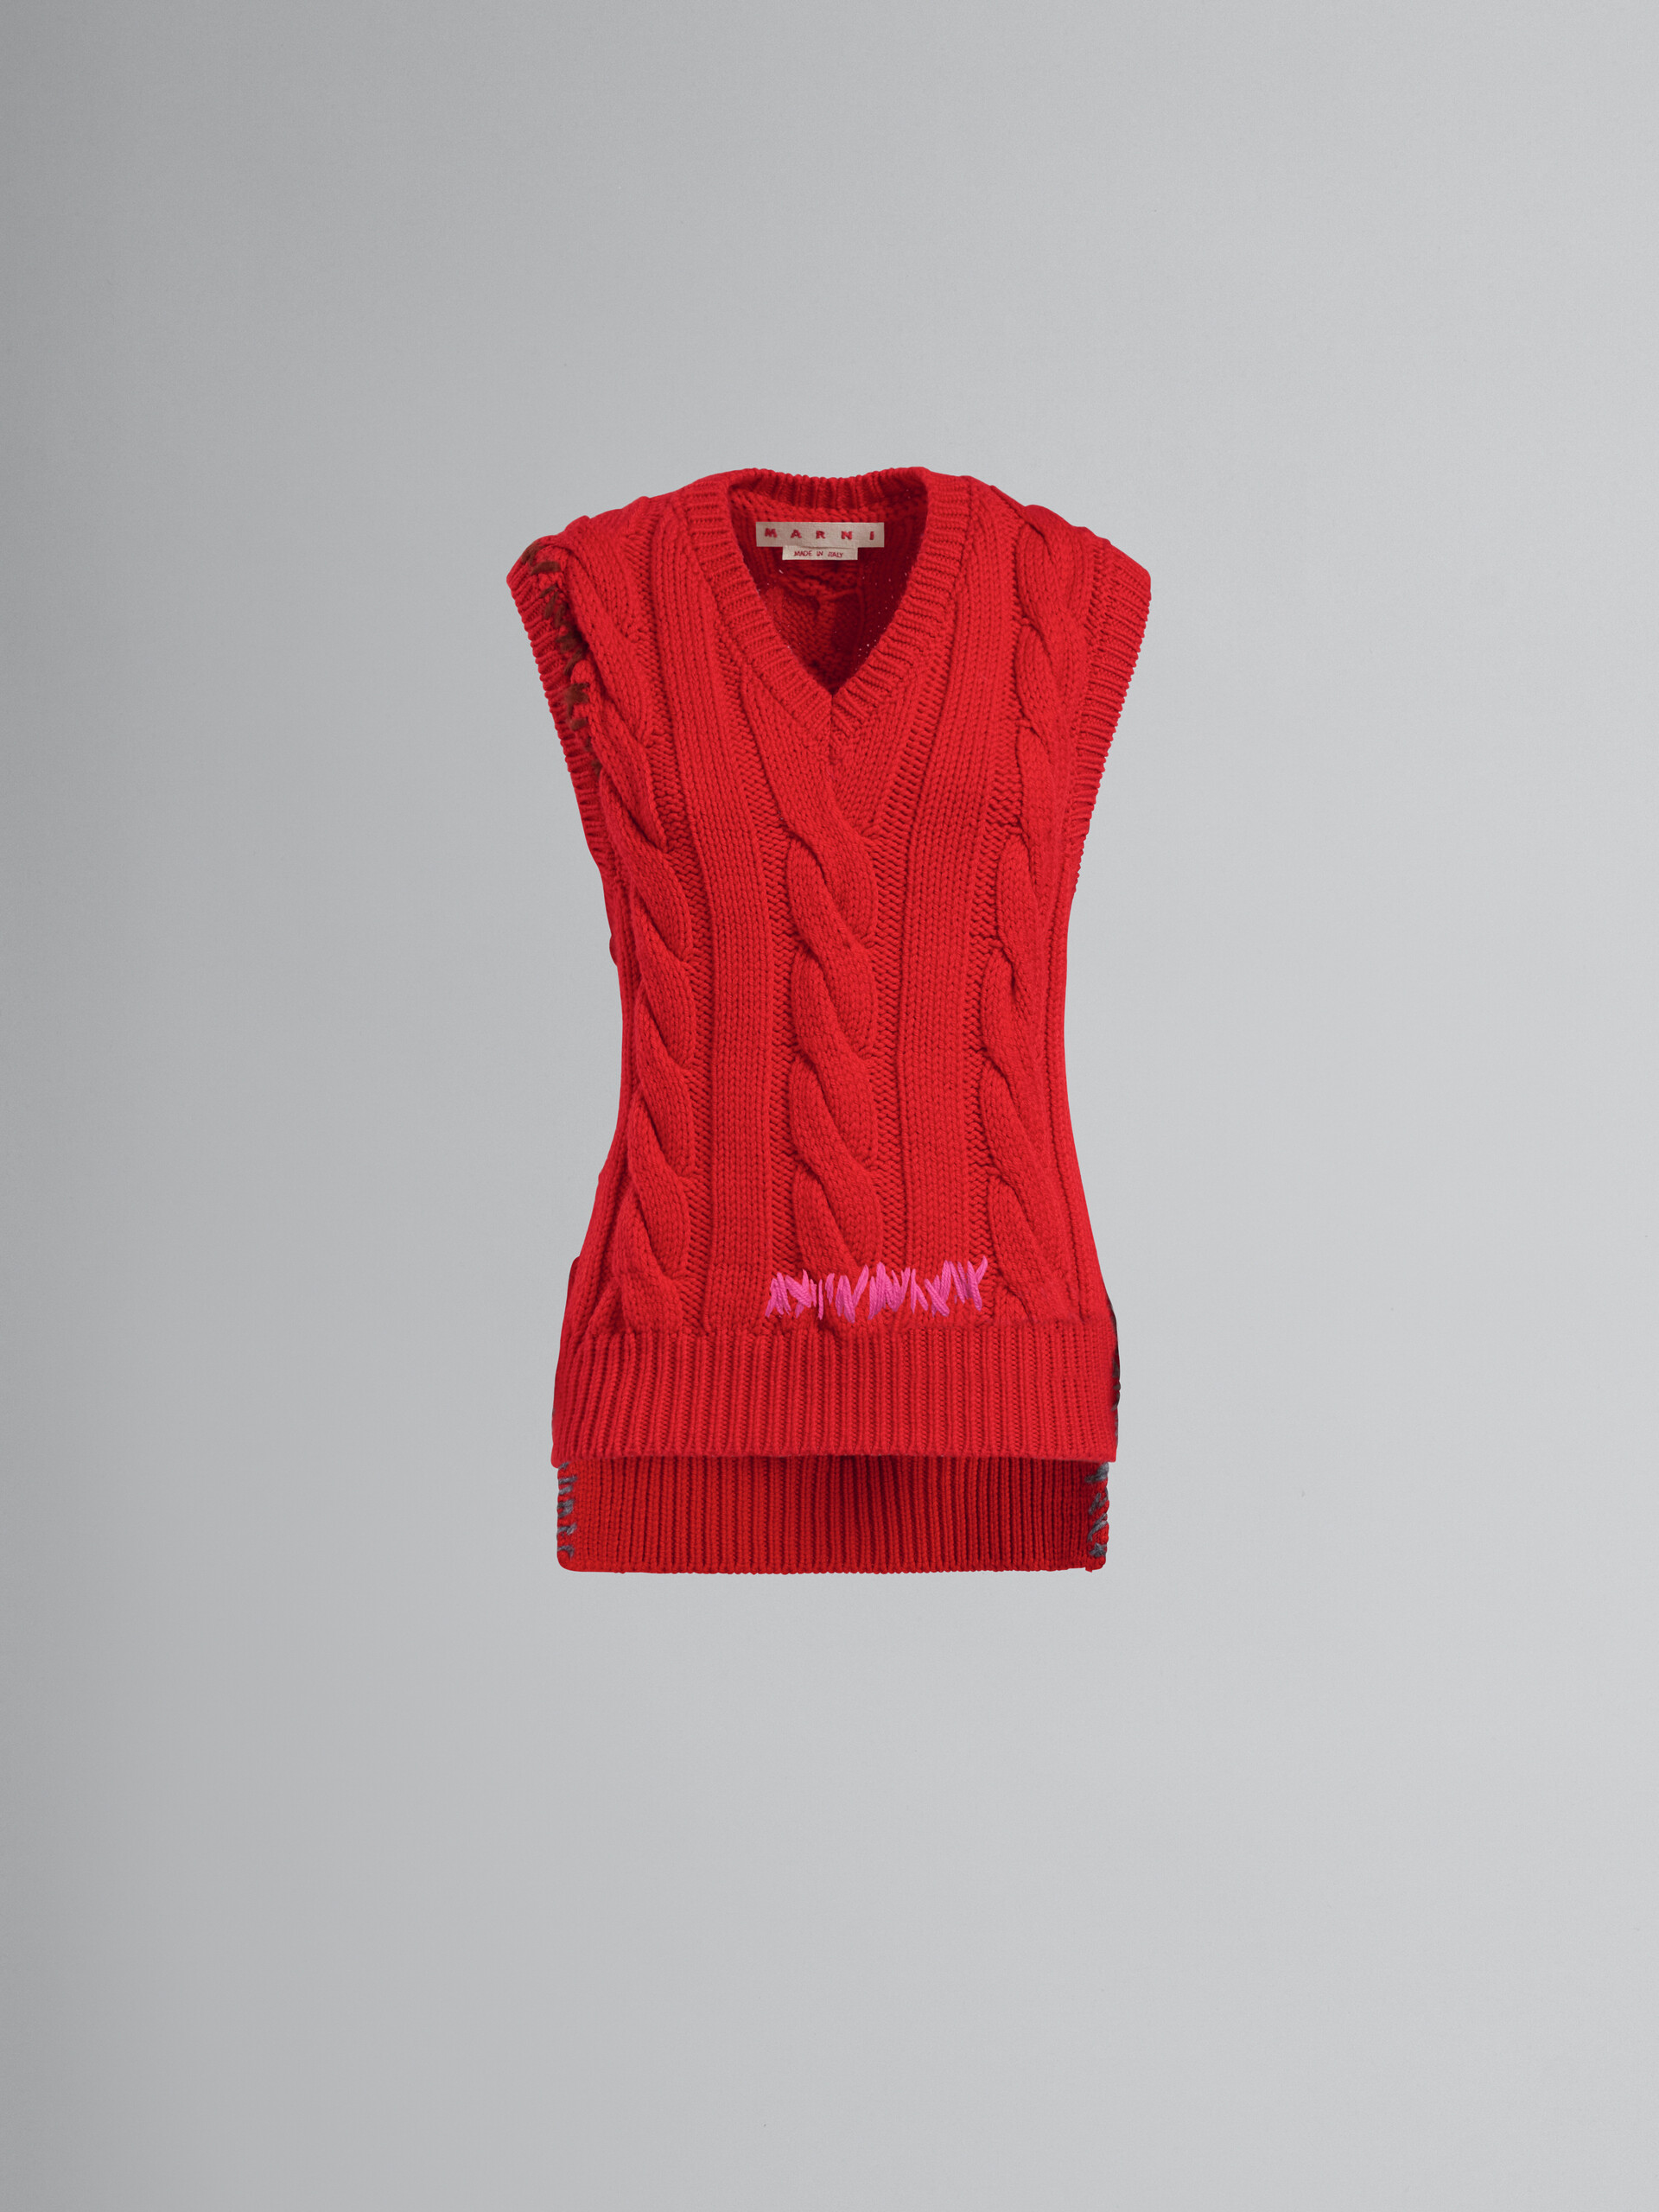 Rote Strickweste mit Zopfmuster - Pullover - Image 1